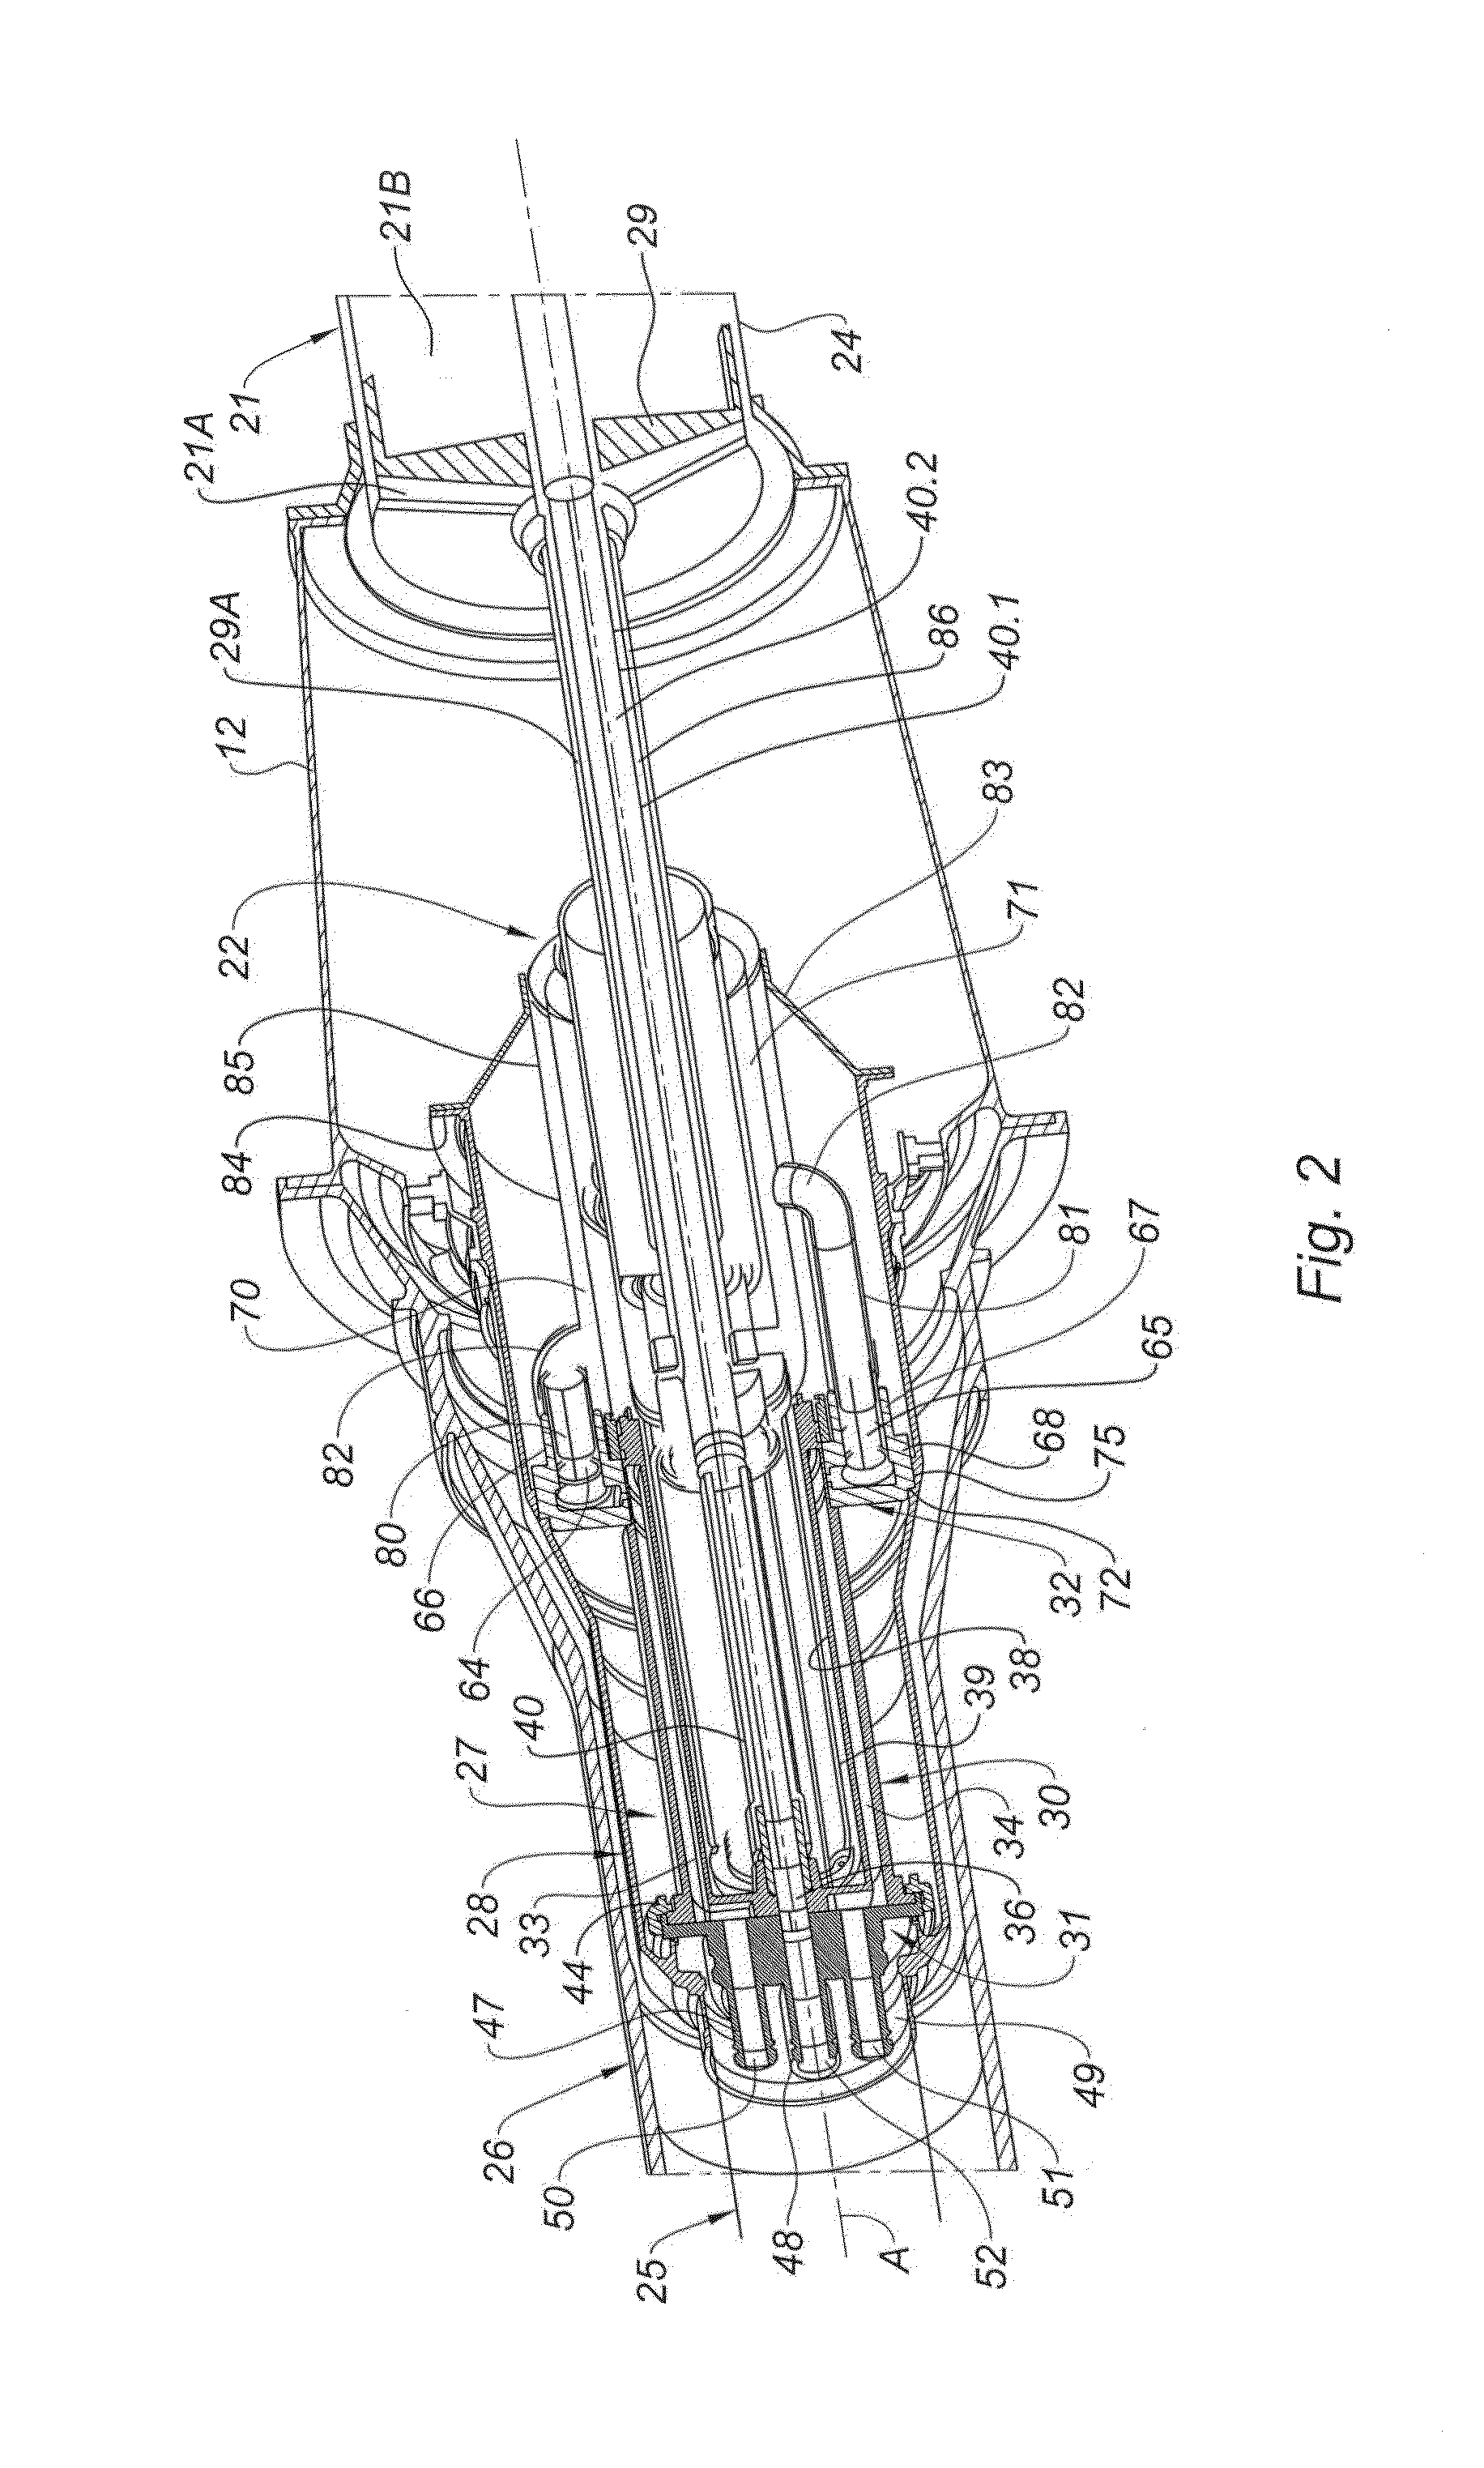 Device for the blind coupling of fluidic, electrical or similar supplies, to a receiving control mechanism